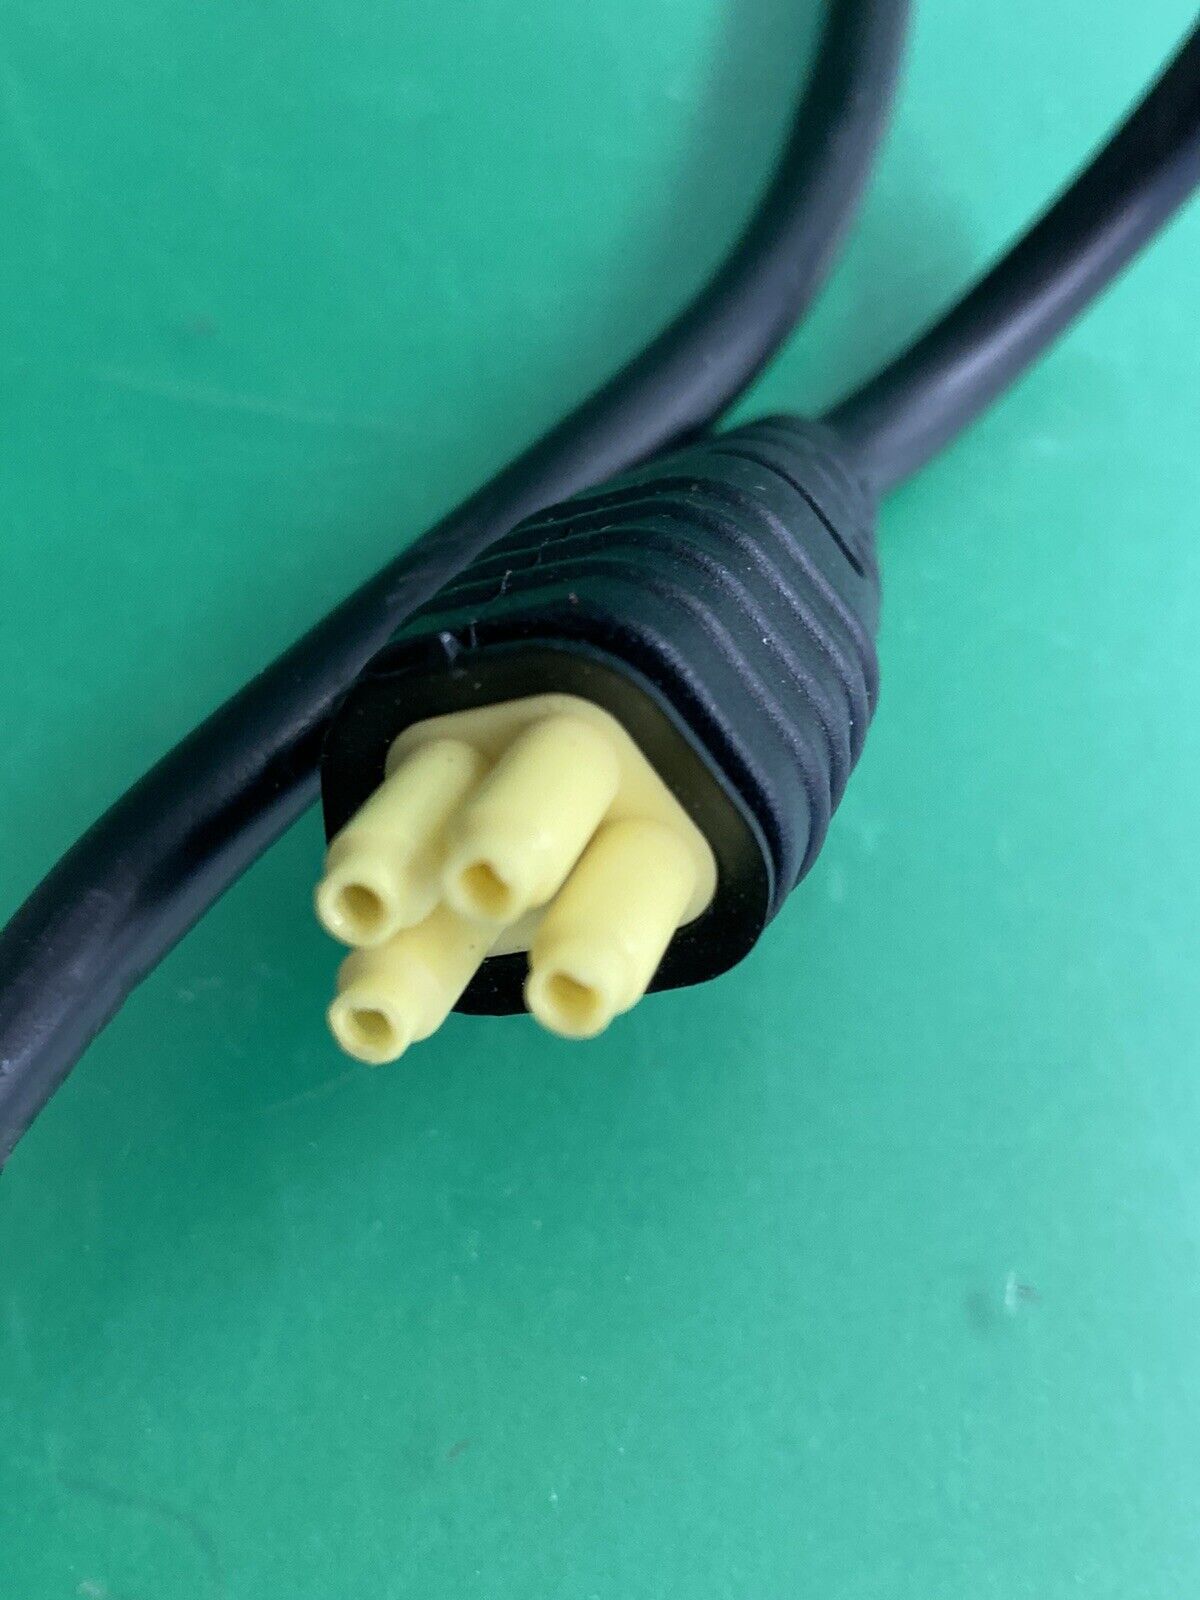 RNET Quickie / Permobil 60" RNET 90° Joystick Cable Plug for Wheelchair #J482